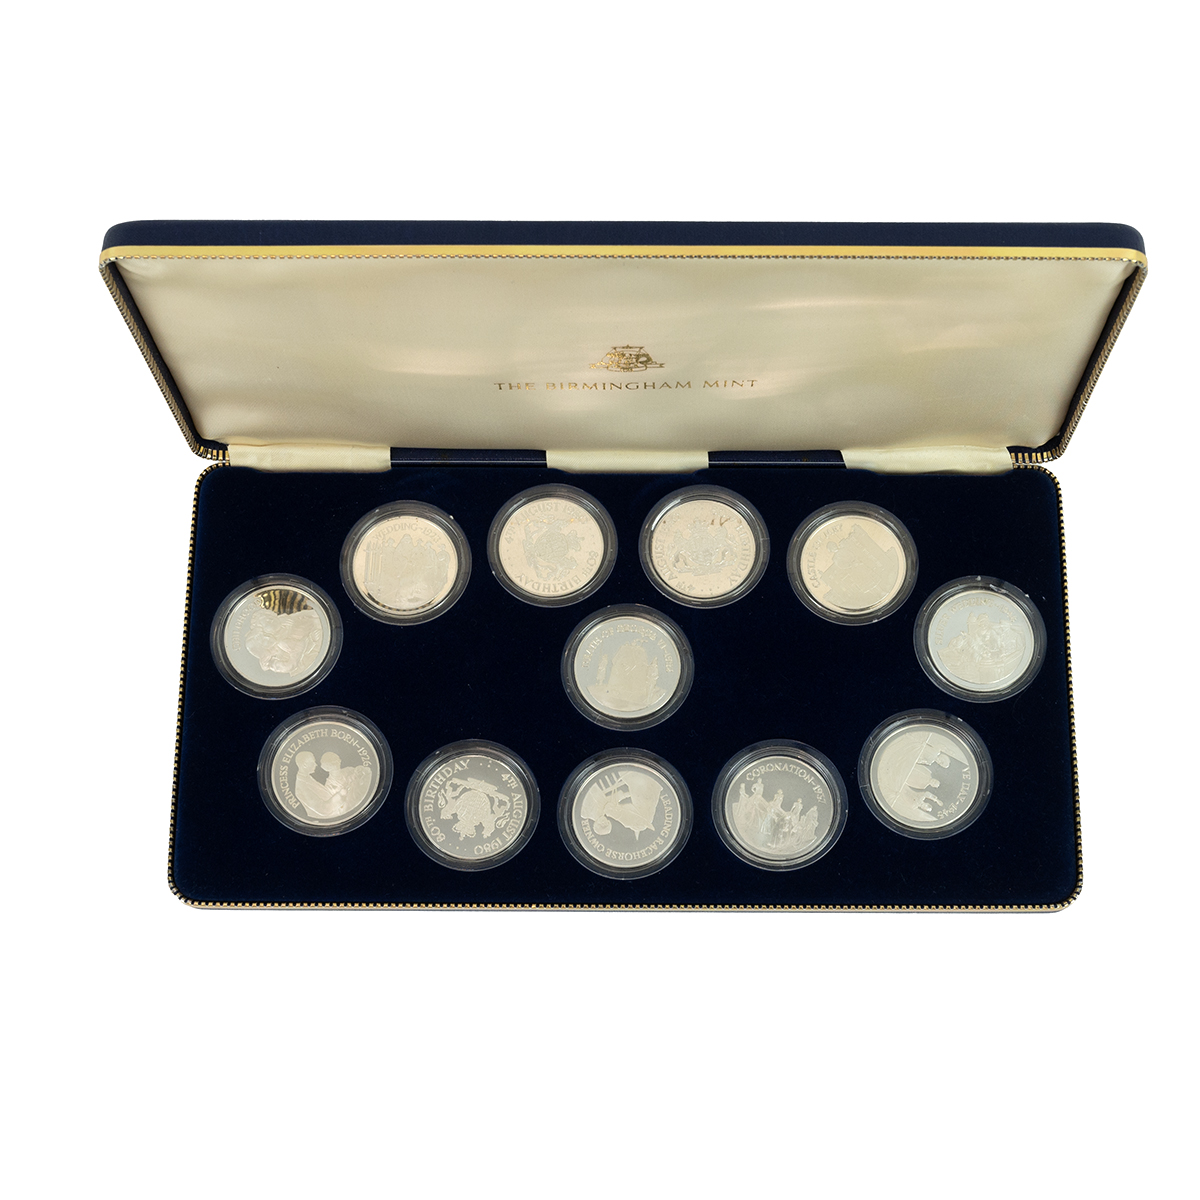 1980 Queen Mother 80th Birthday 925 silver proof 12-coin medal set from The Birmingham Mint. Weig... - Image 2 of 2